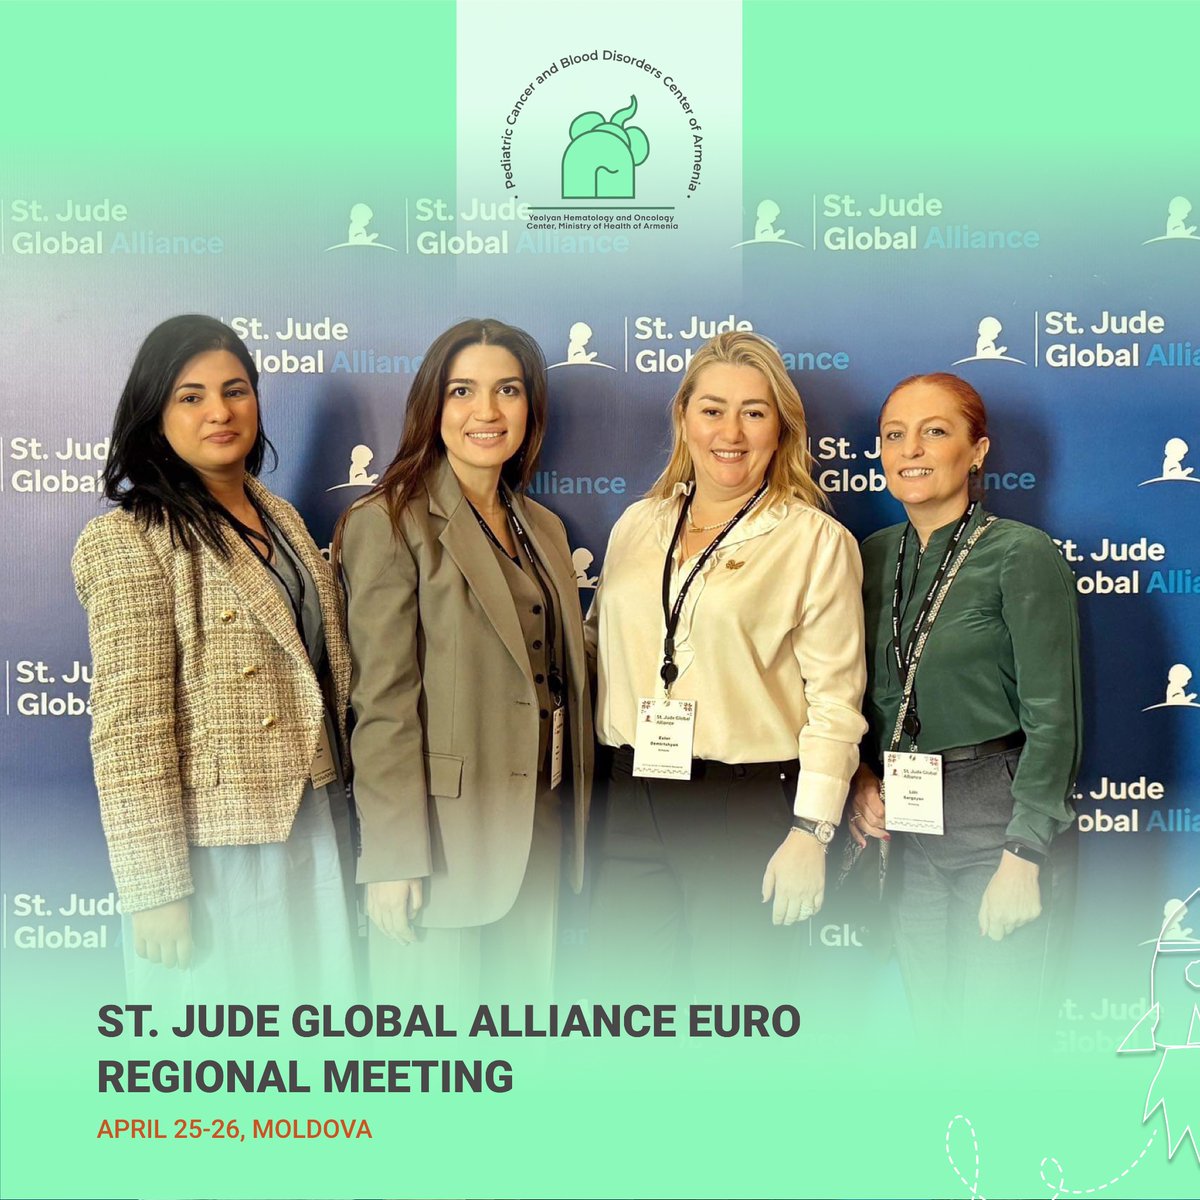 St. Jude Global Alliance EURO Regional Meeting: April 25-26 - Lilit Sargsyan, Head of the Pediatric Oncology Department, - Mane Gizhlaryan and Anna Avagyan, Pediatric Hematologist-Oncologists, Ester Demirtshyan, City of Smile Charitable Foundation, visited Moldova. 🇲🇩